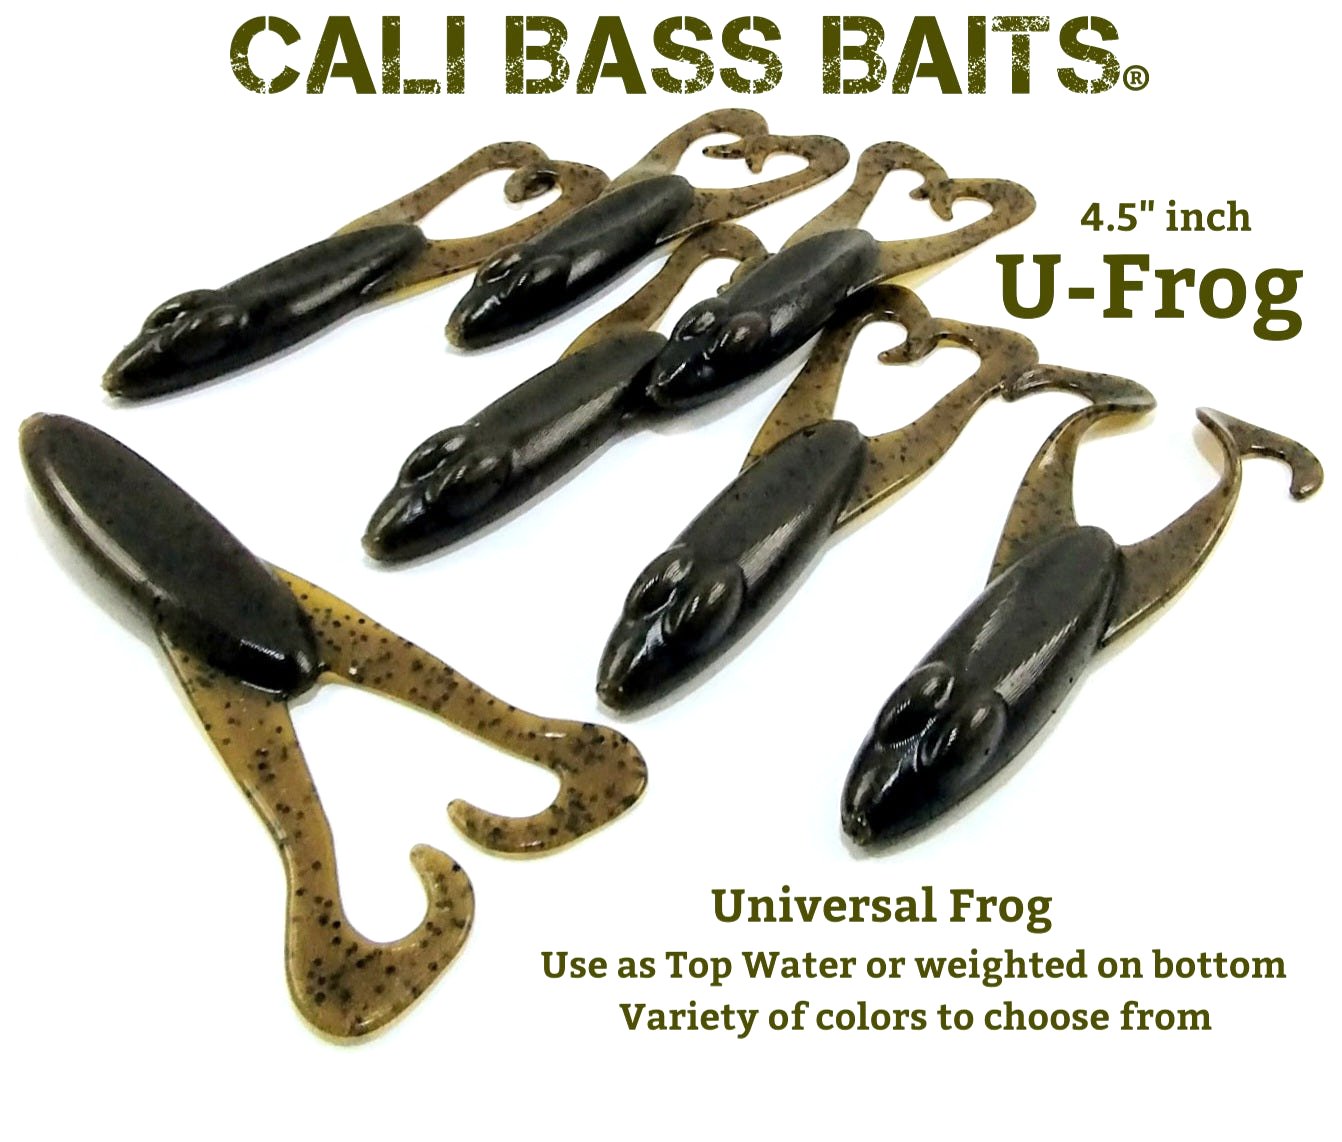 NEW U-Frog 4.5" Top Water Frog, excellent swimming leg action. Peferct for that thick stuff